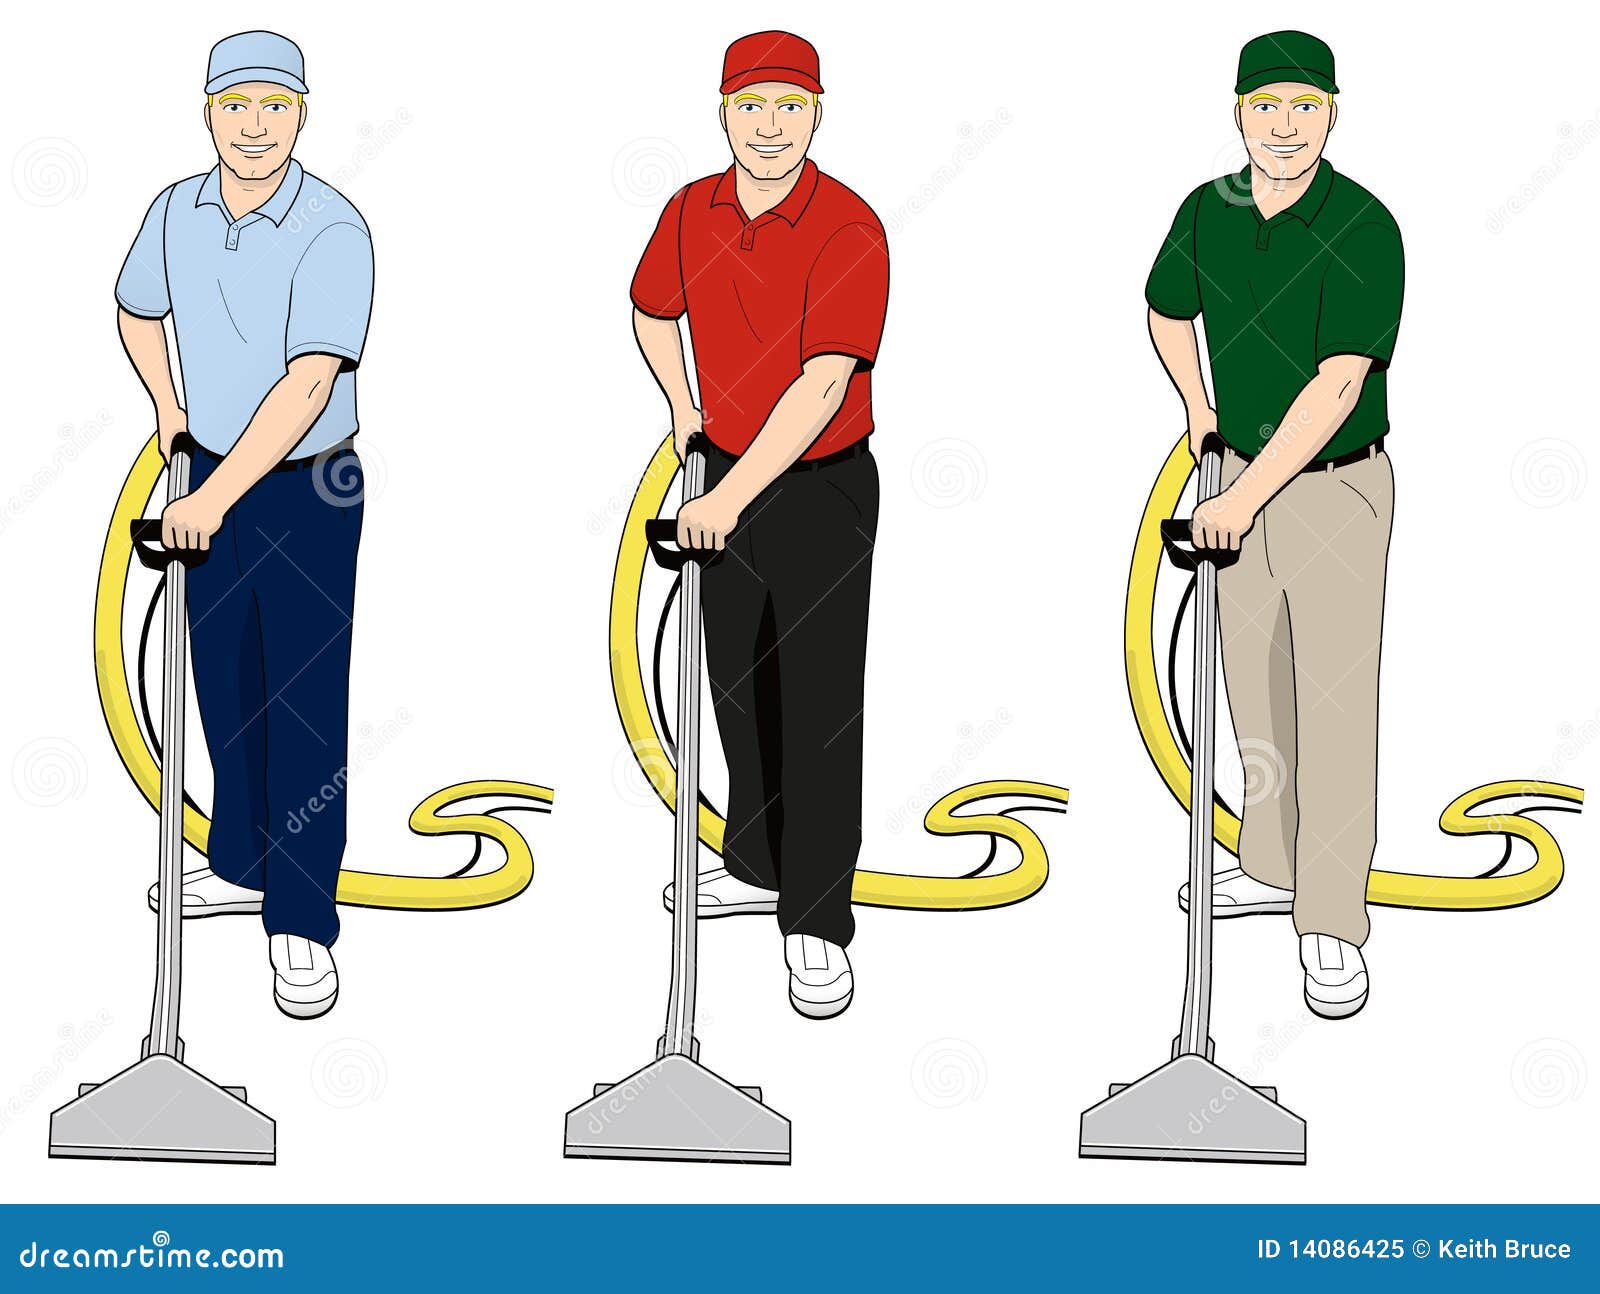 industrial cleaning clip art - photo #39